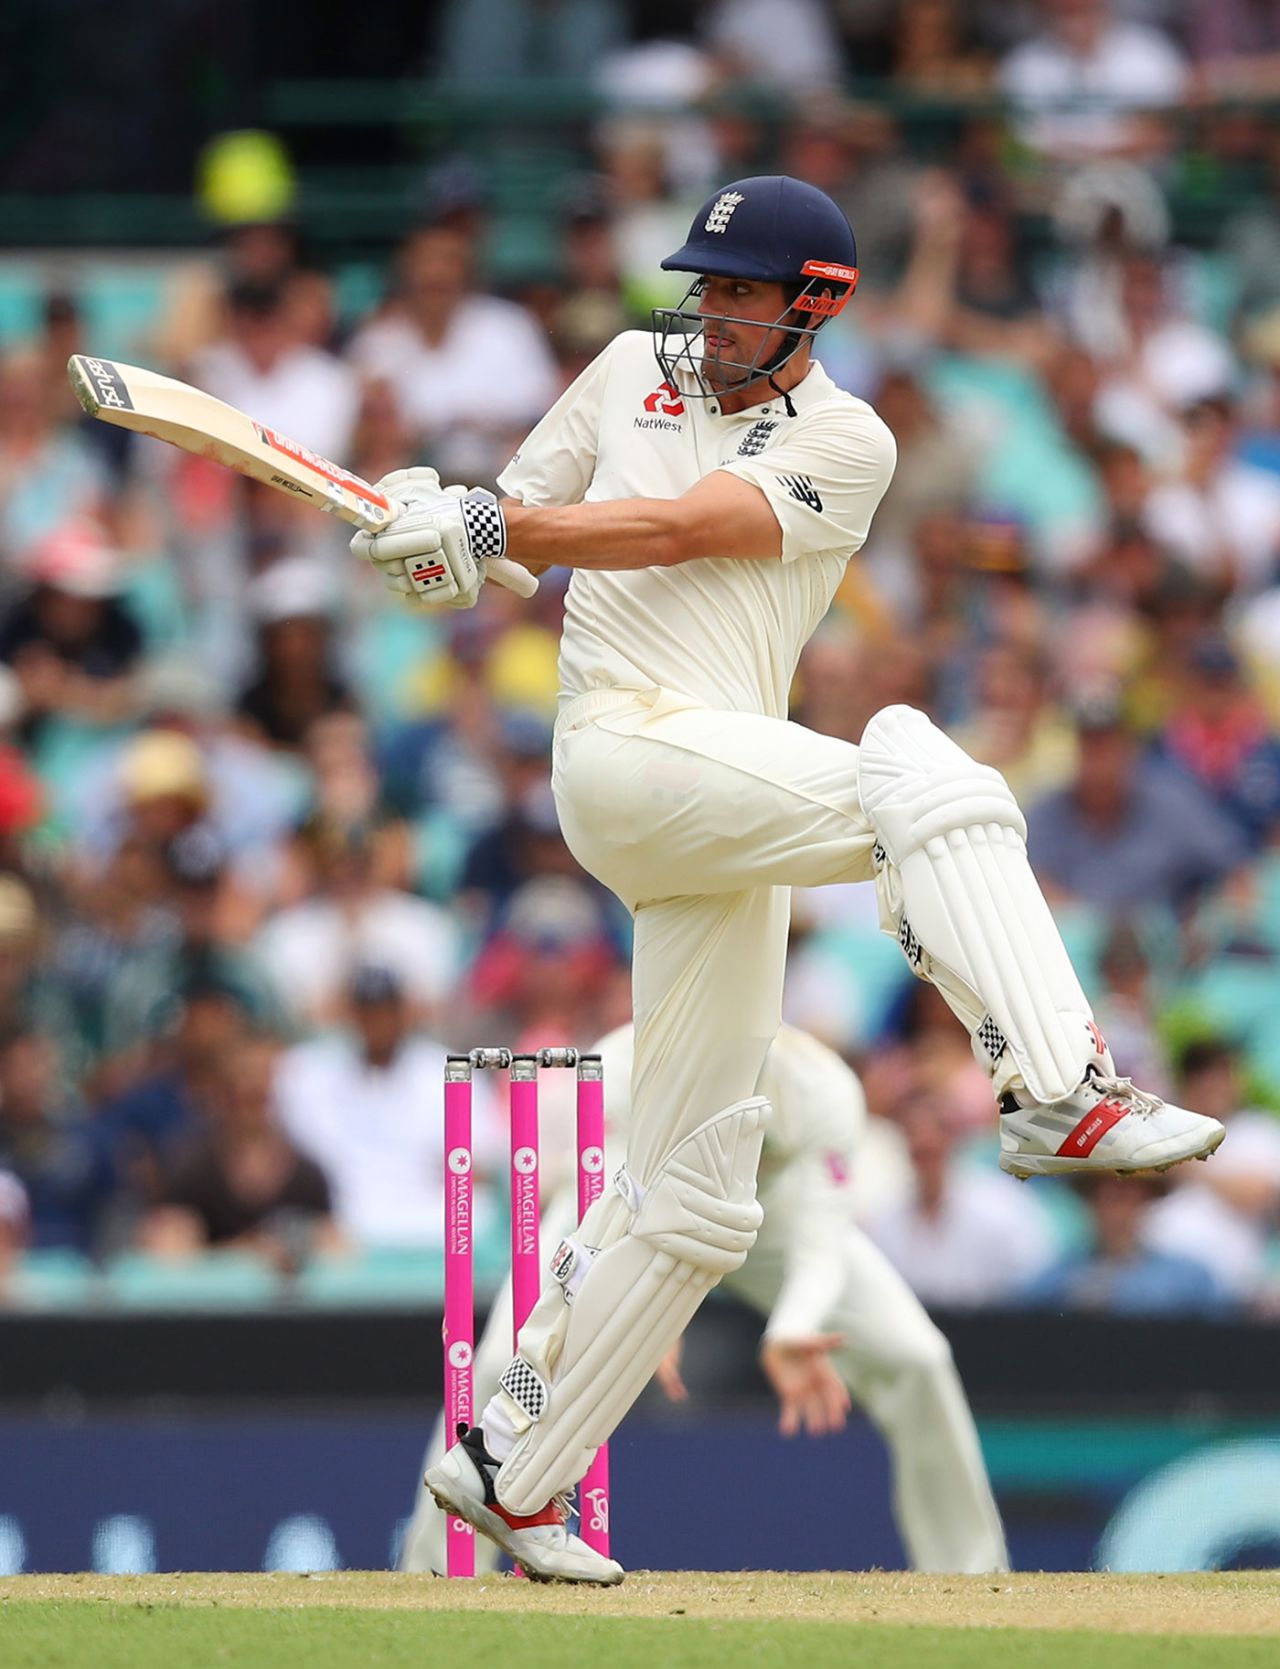 Alastair Cook pulls one off the hip, Australia v England, 5th Ashes Test, Sydney, 1st day, January 4, 2018